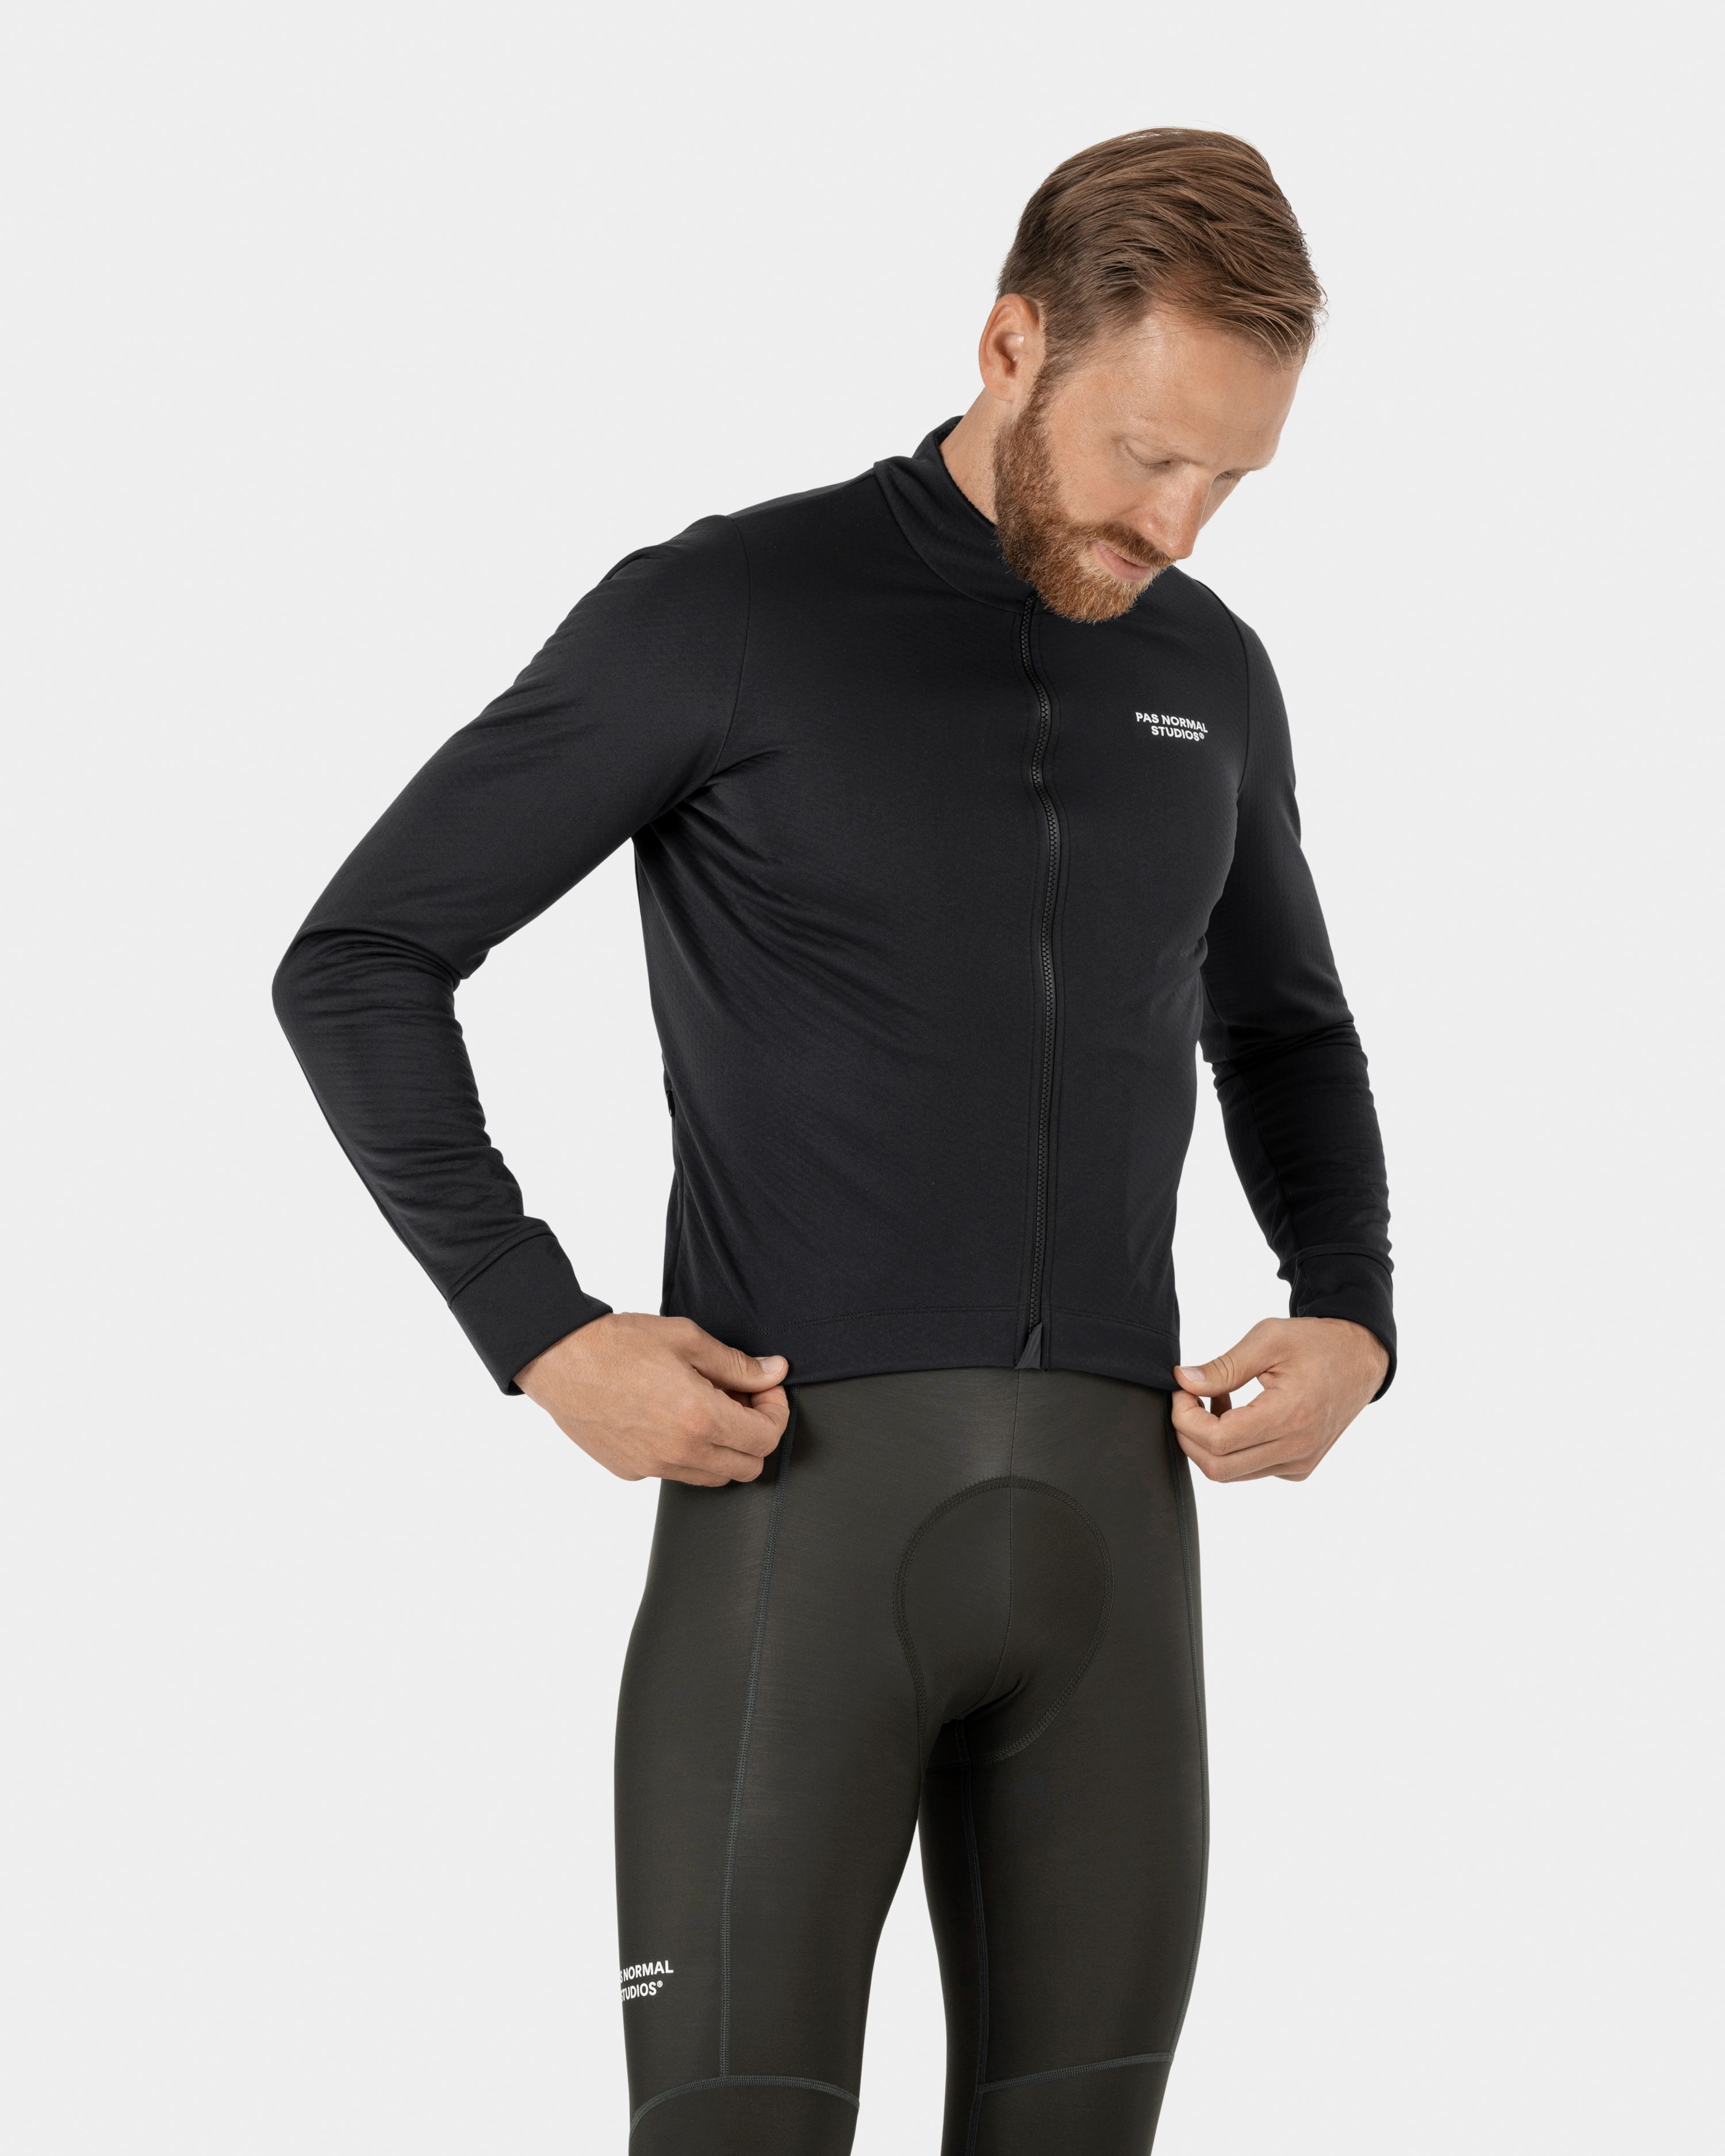 Men's Essential Thermal Long Sleeve Jersey